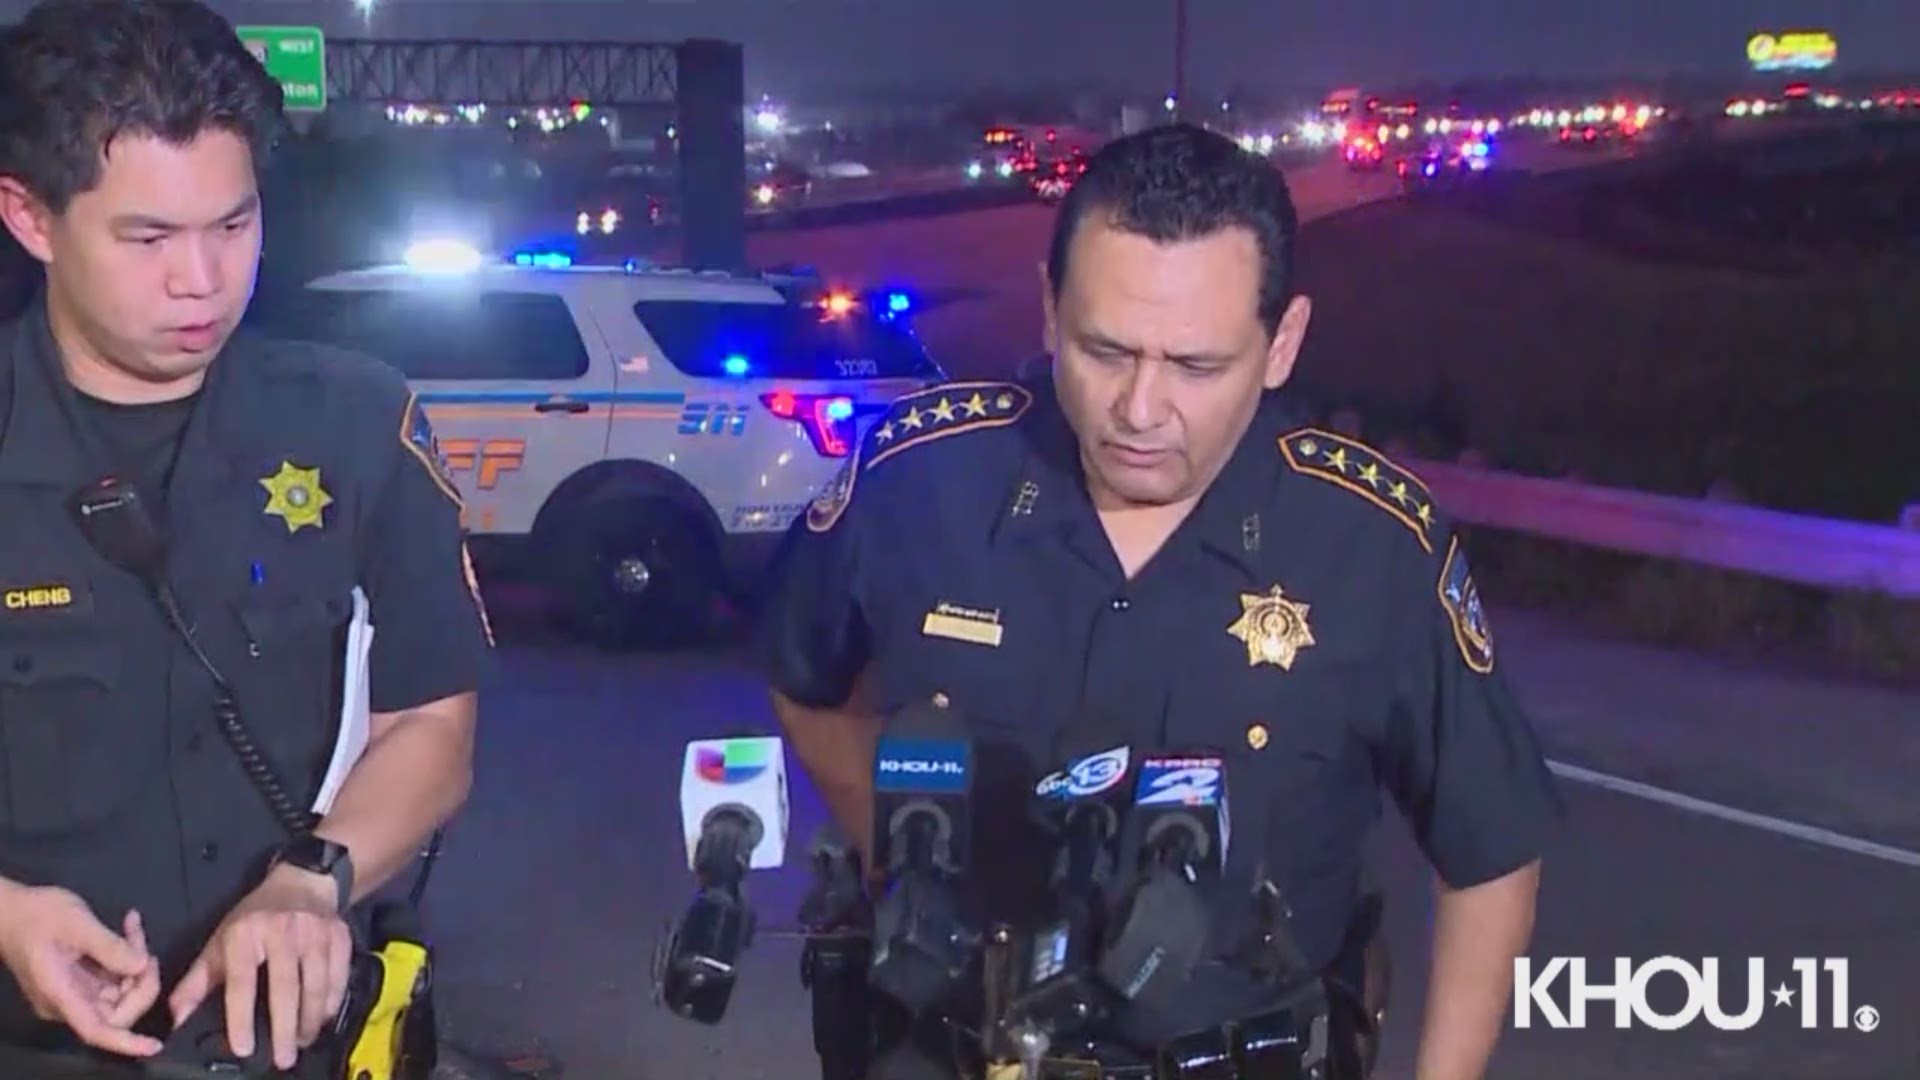 The I-10 East Freeway was closed heading west/inbound after an 18-wheeler went off the bridge into the San Jacinto River early Thursday, according to Harris County Sheriff Ed Gonzalez.